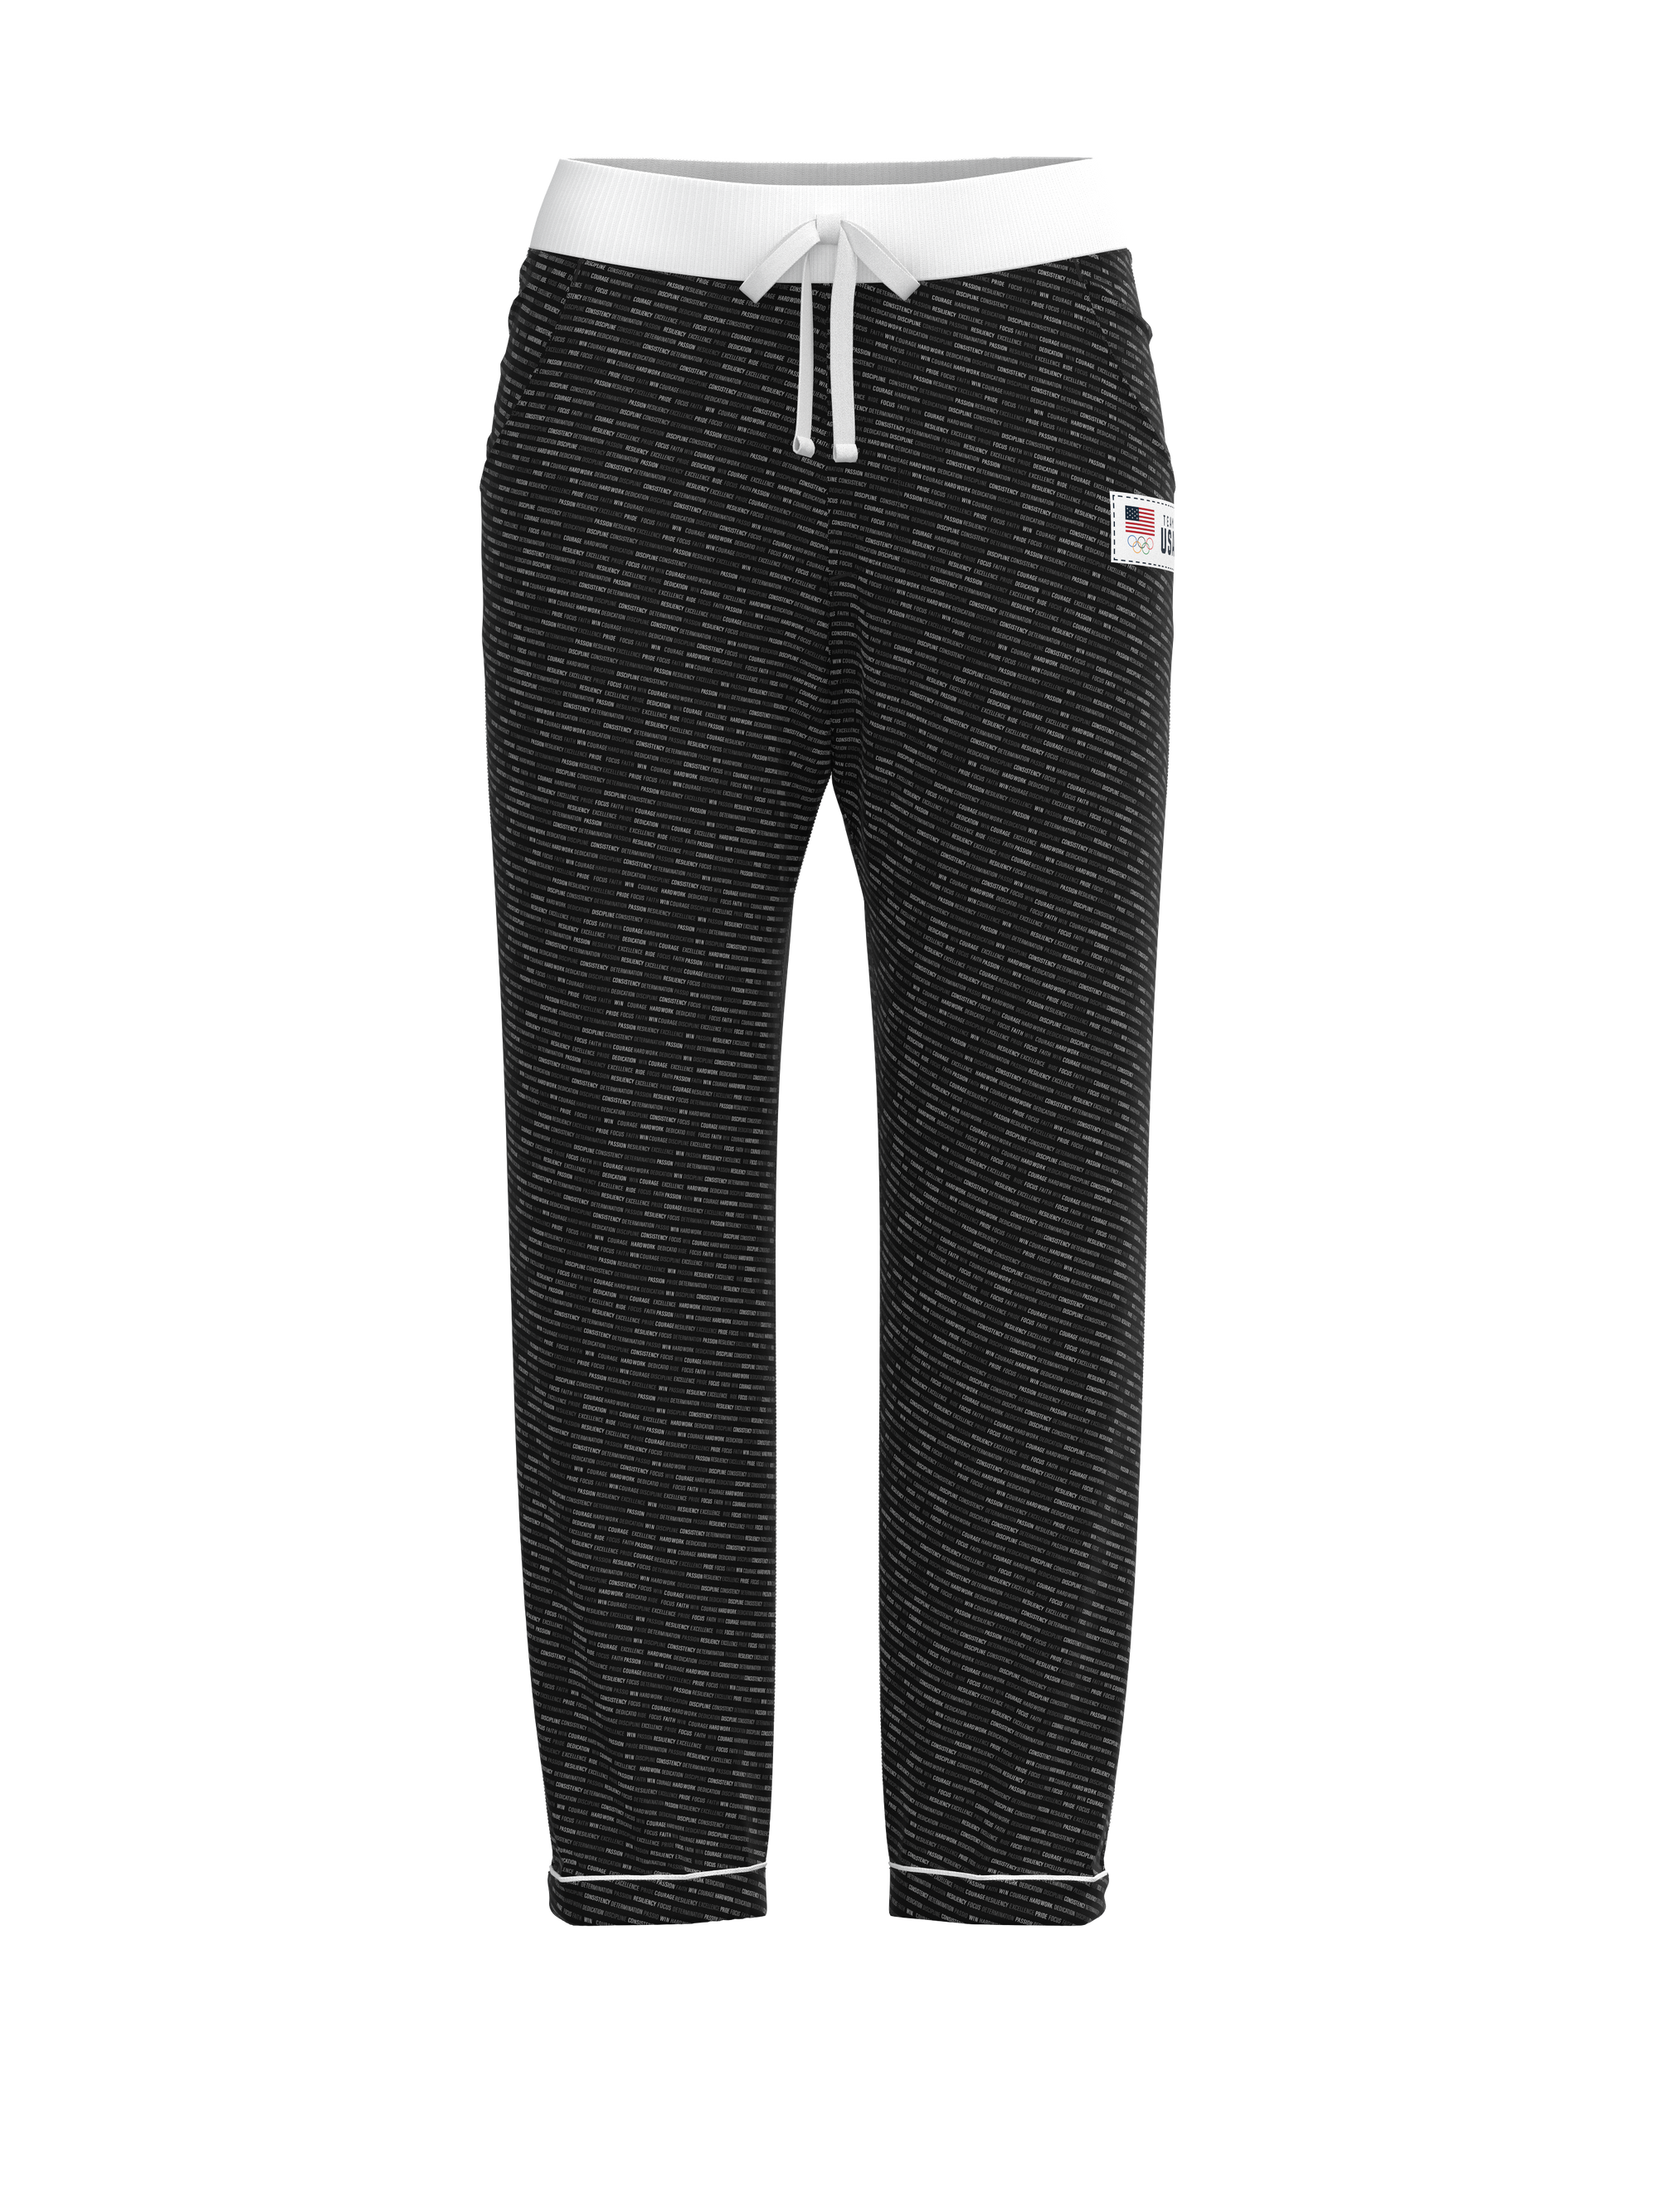 Inspirational Team USA Relaxed Fit Pant (Women's)